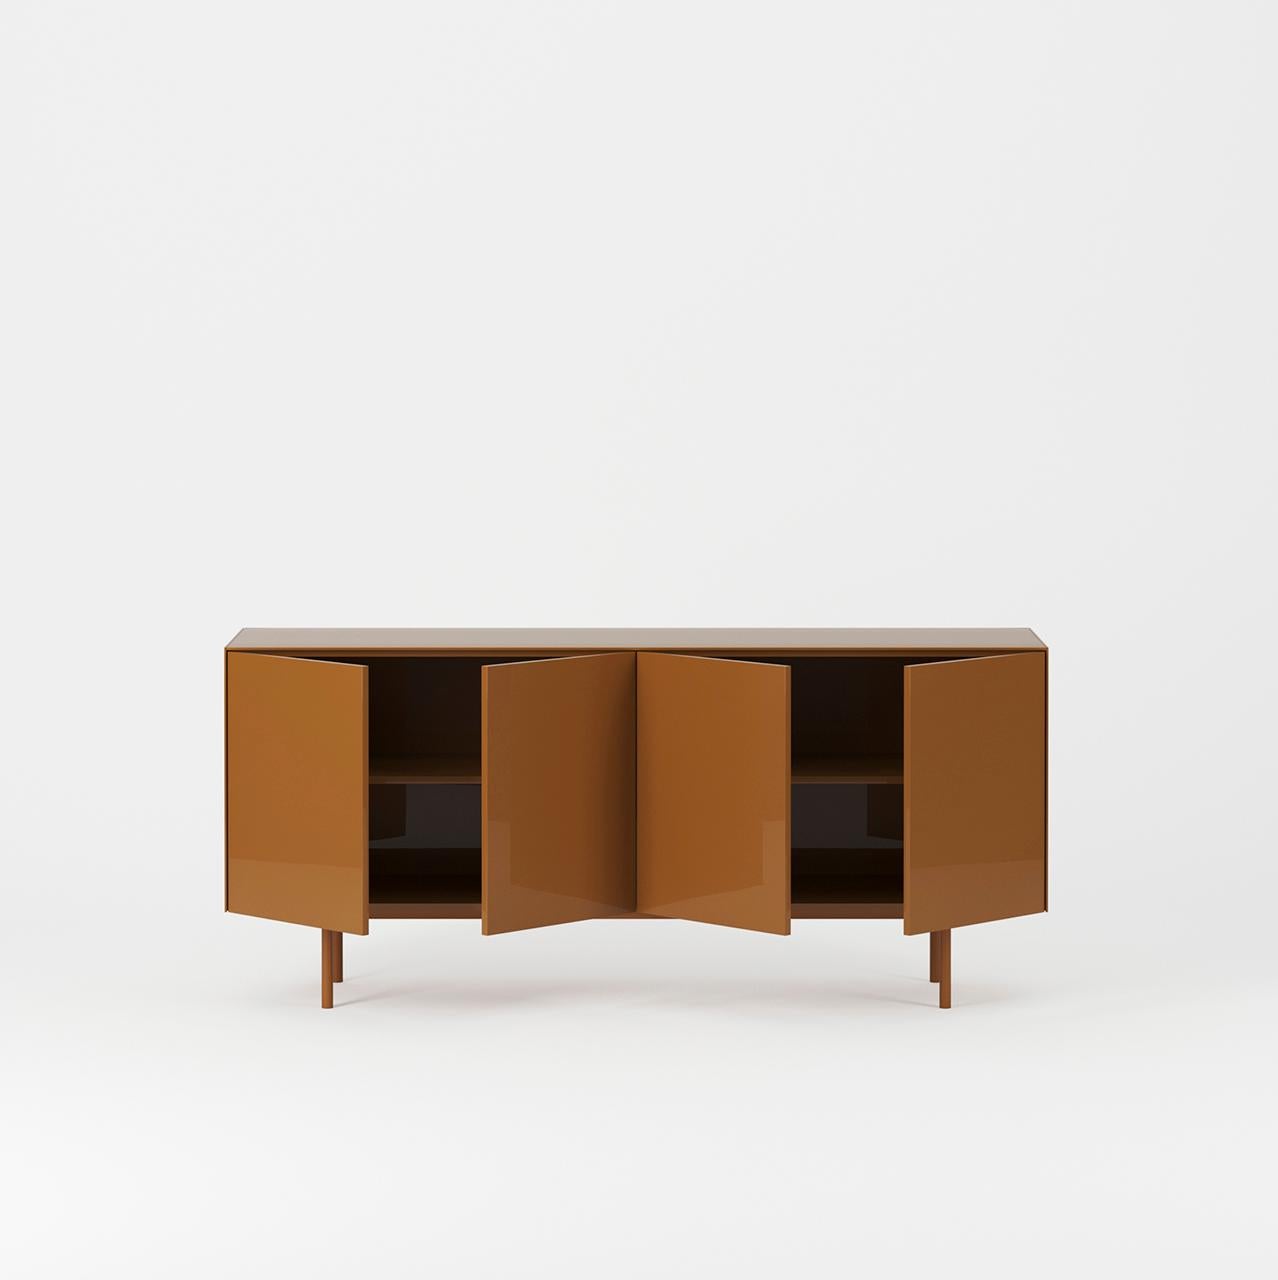 The 44 Server in Lacquer 180cm/71